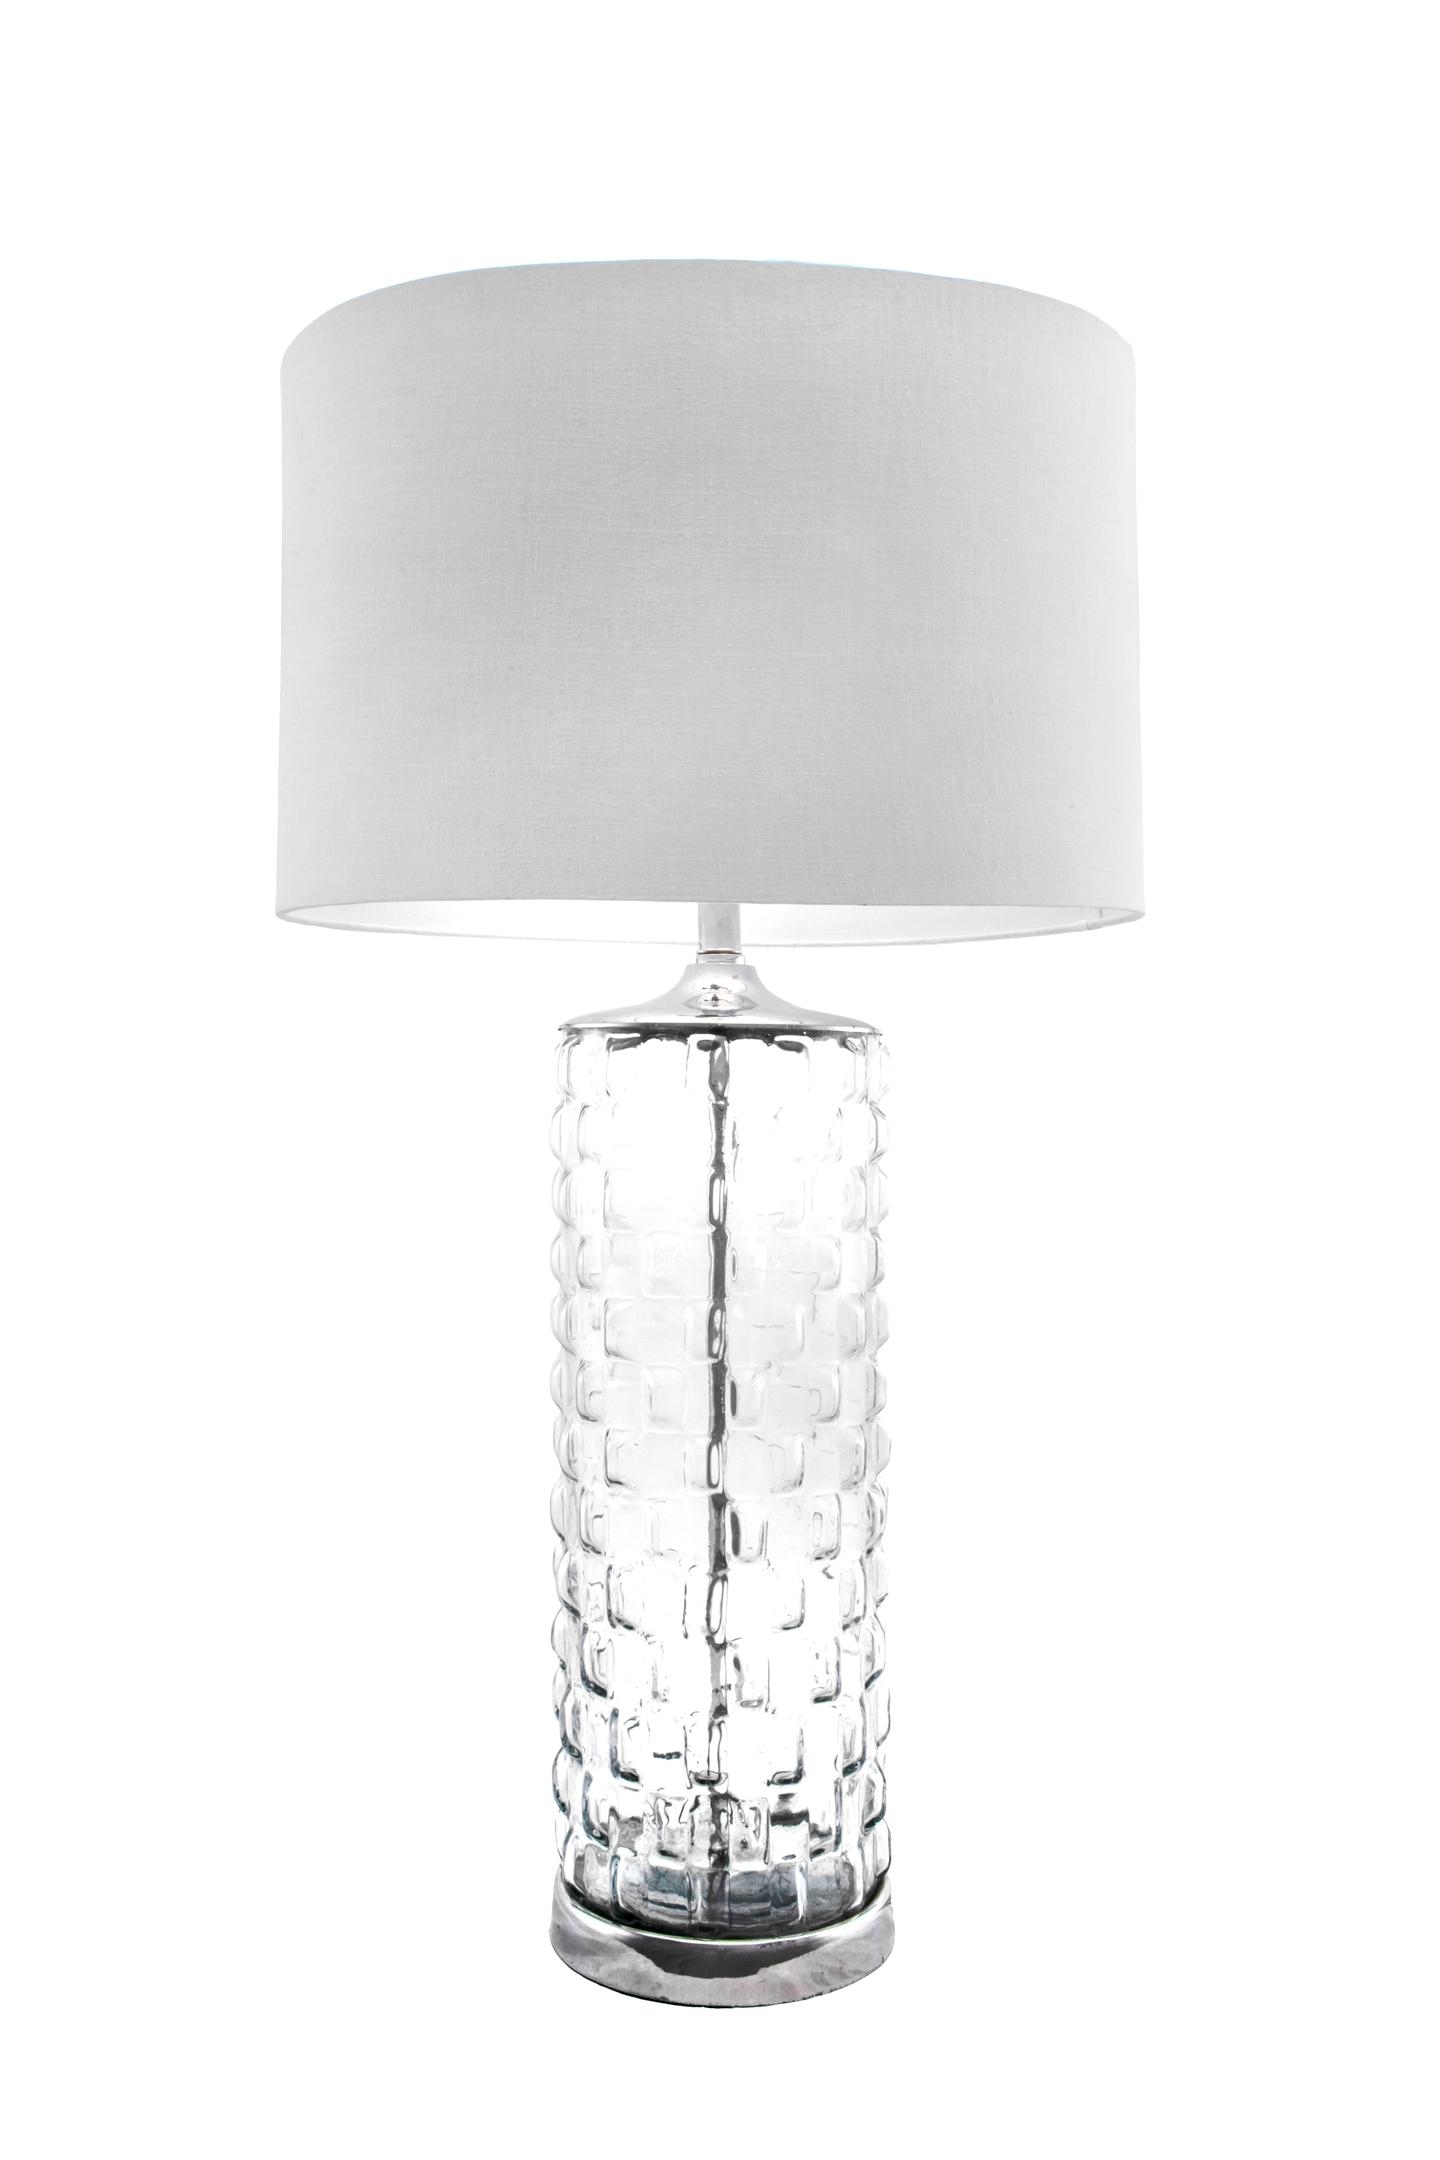 Moore 15" Glass Table Lamp - Image 1